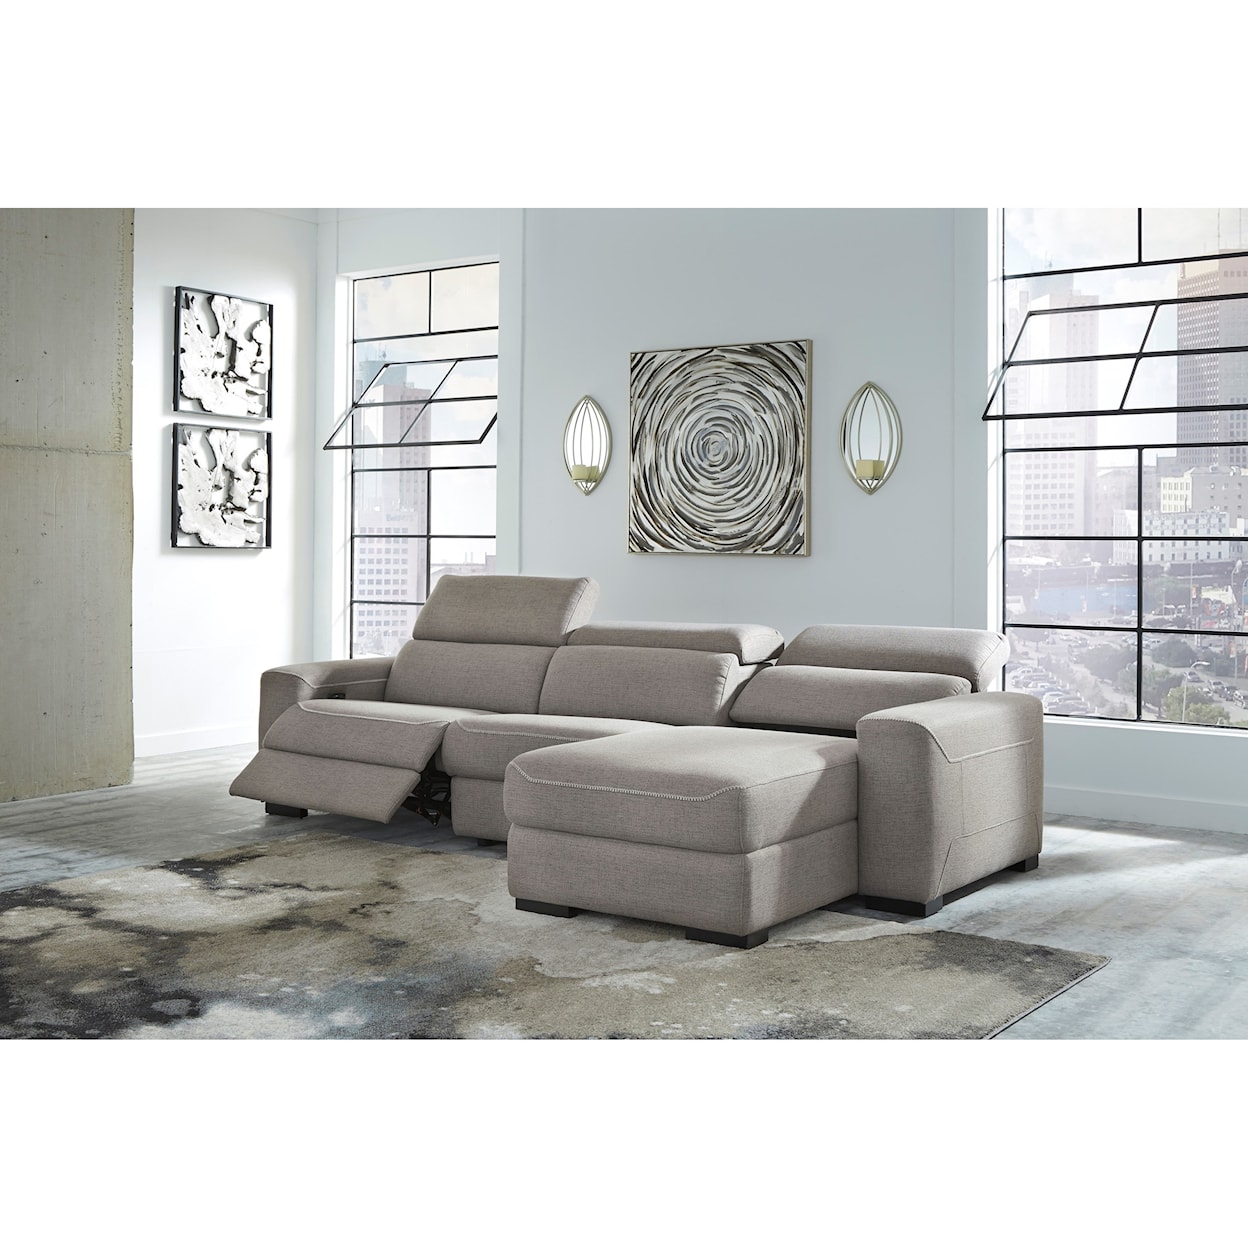 Signature Design by Ashley Mabton 3-Piece Power Reclining Sectional w/ Chaise